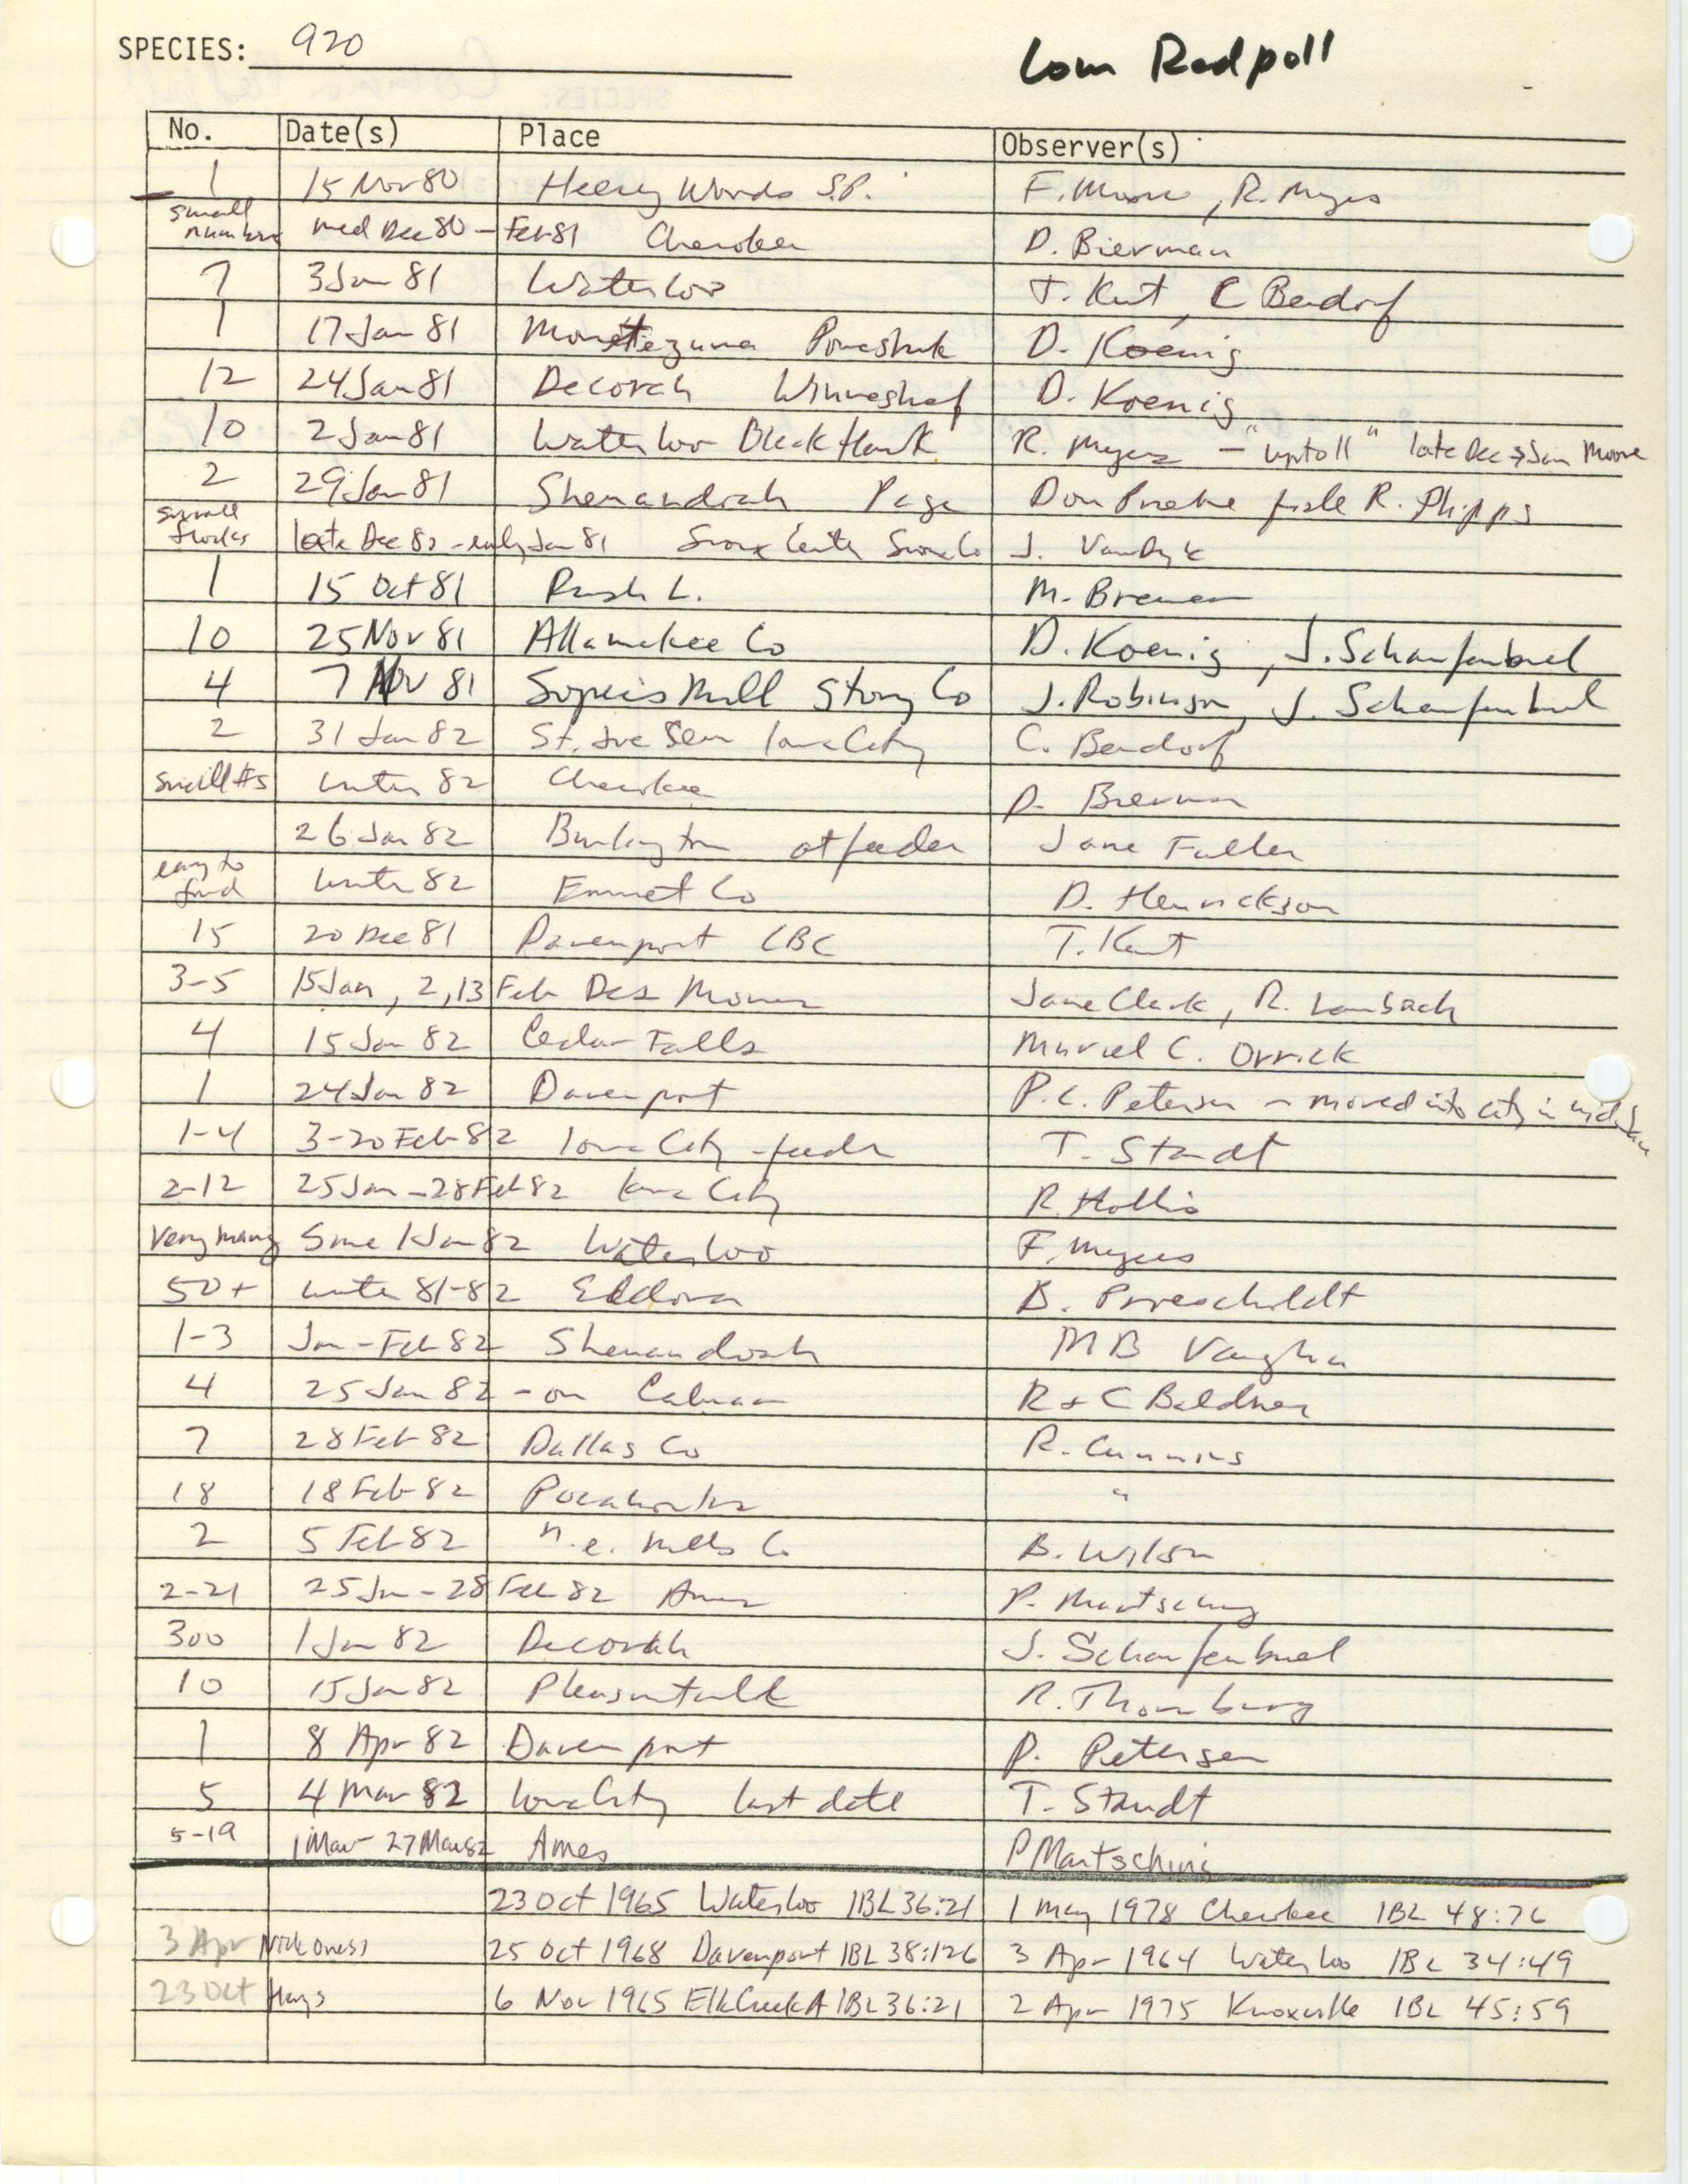 Iowa Ornithologists' Union, field report compiled data, Common Redpoll, 1965-1982